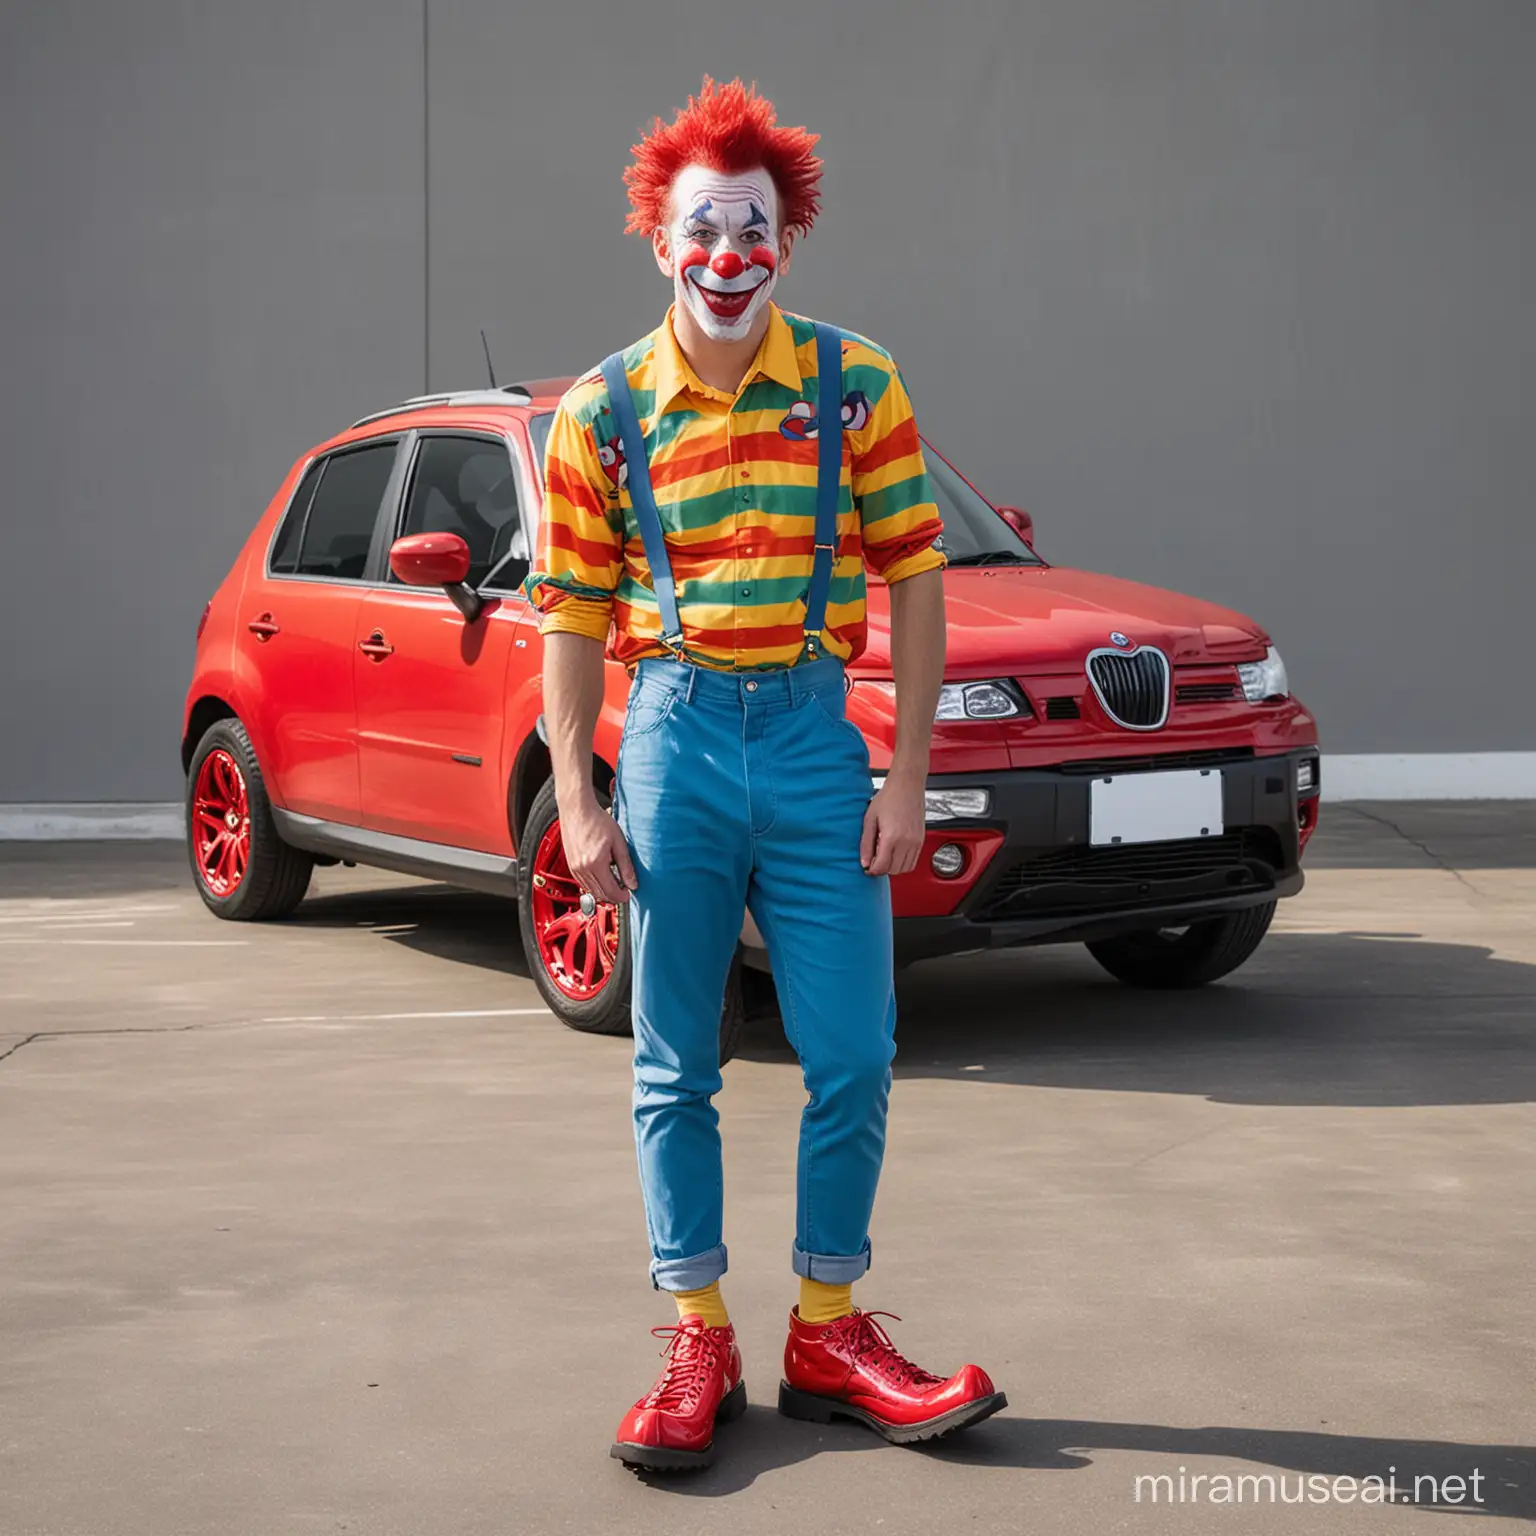 Proud man wearing clown shoes standing in front of new car full body view